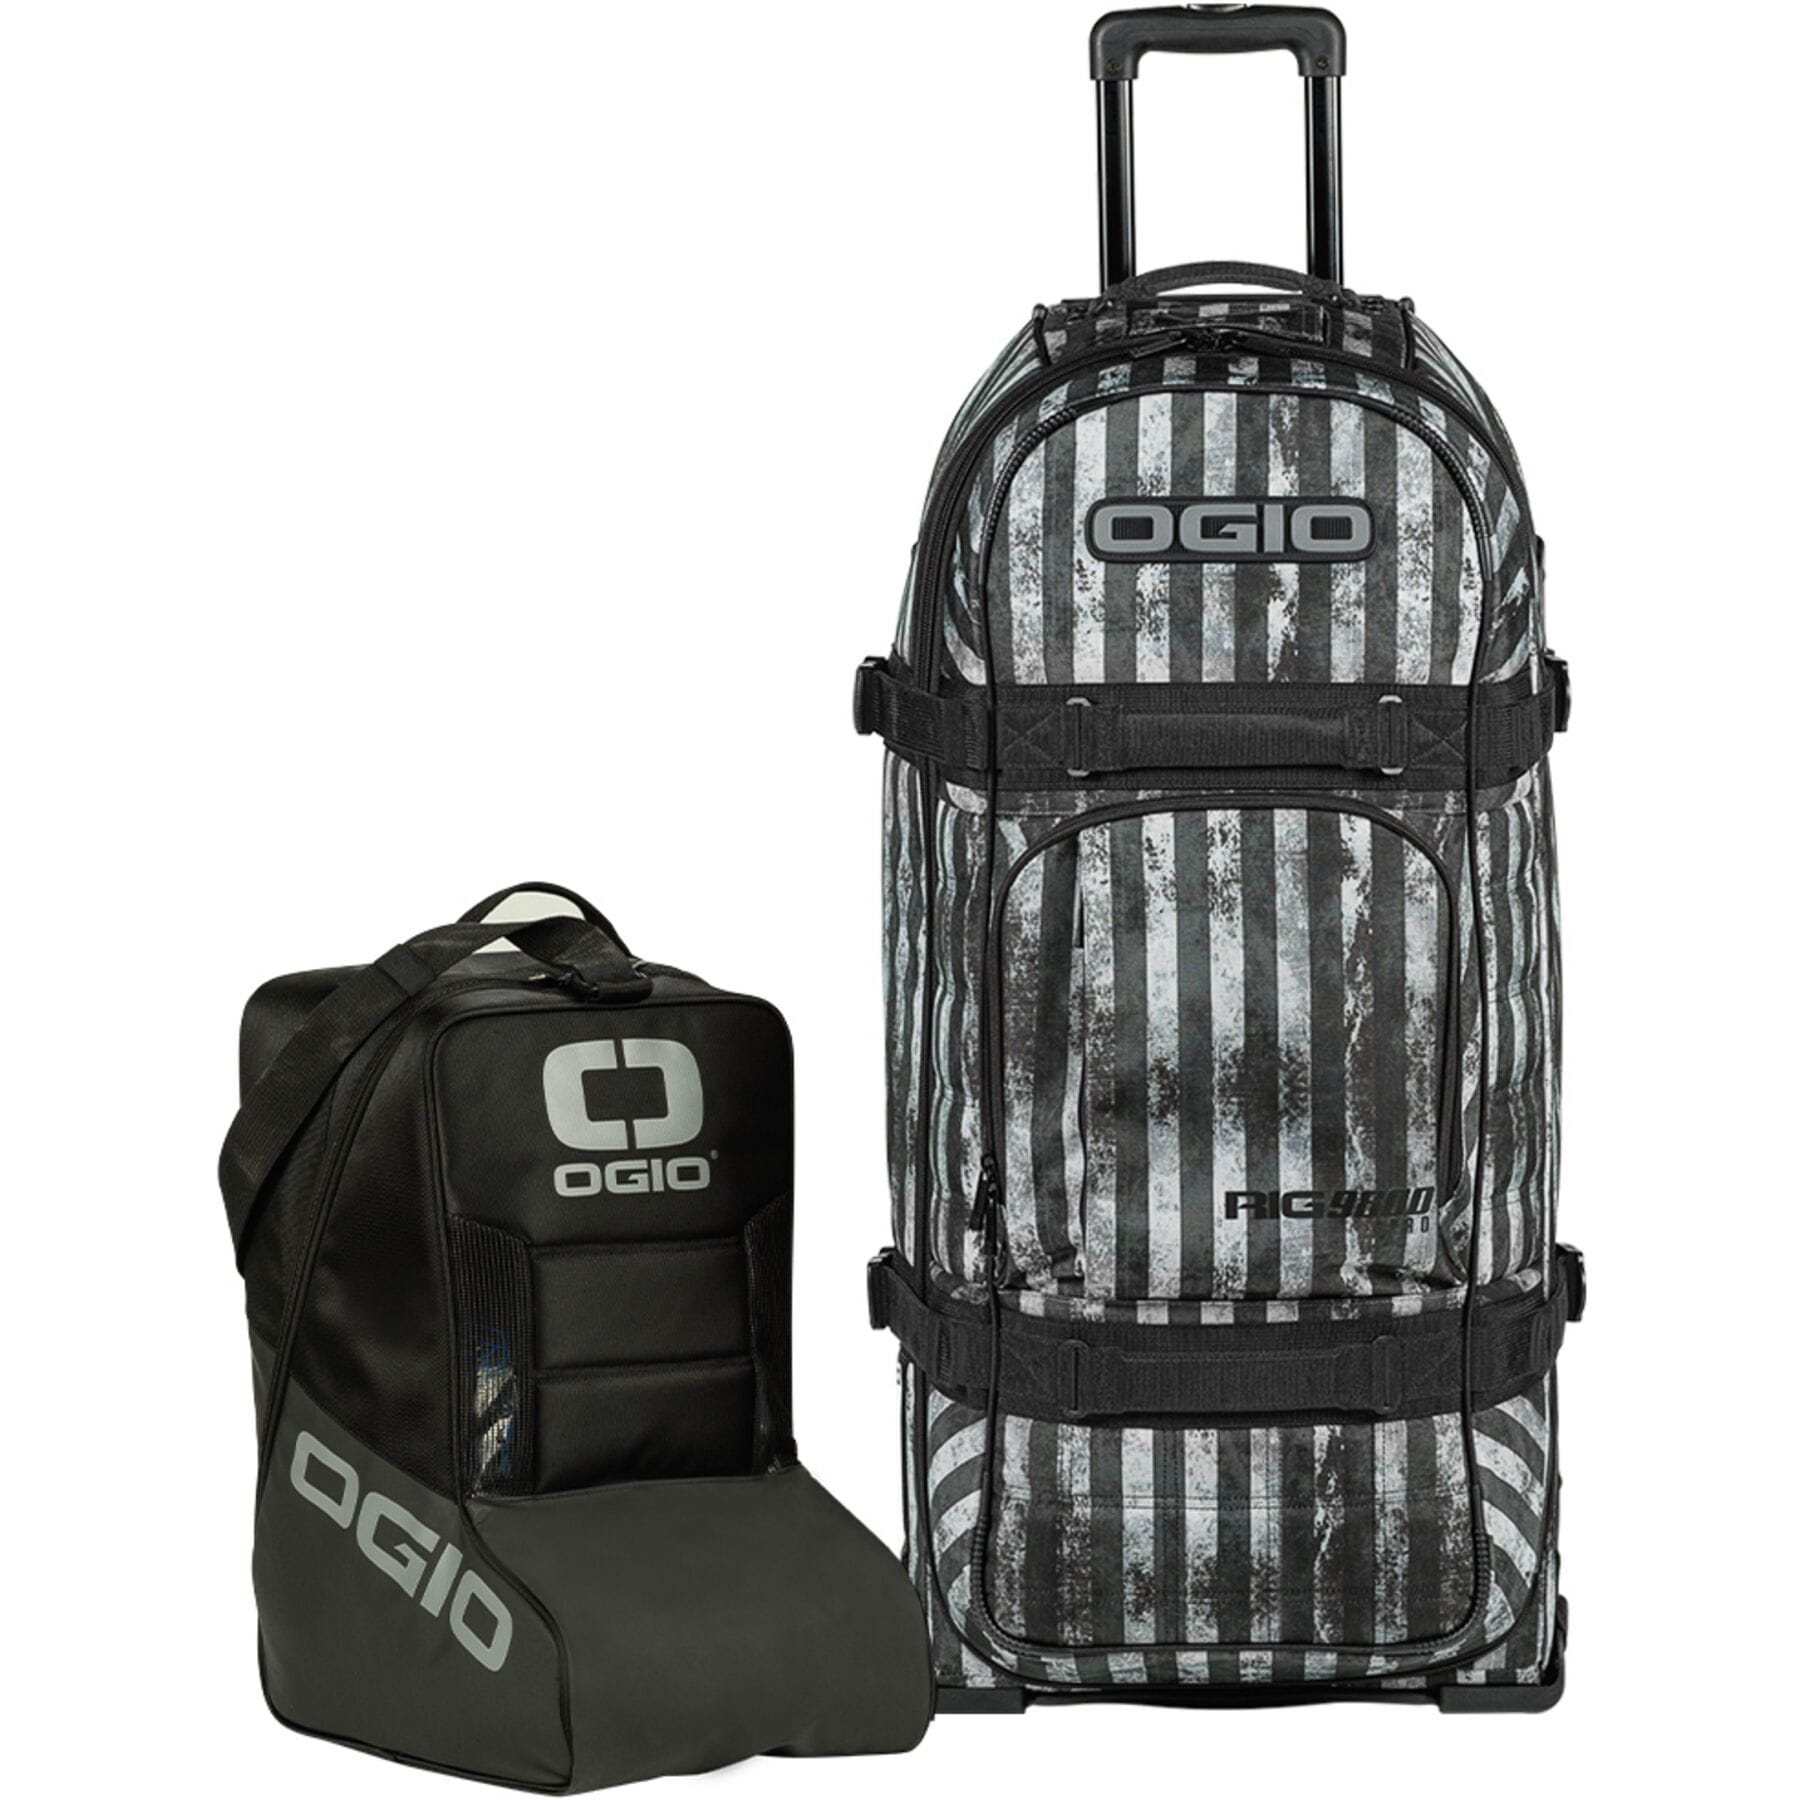 Rig 9800 PRO - Jailbreak travel gear bag in action, showcasing its durability and ample storage space.